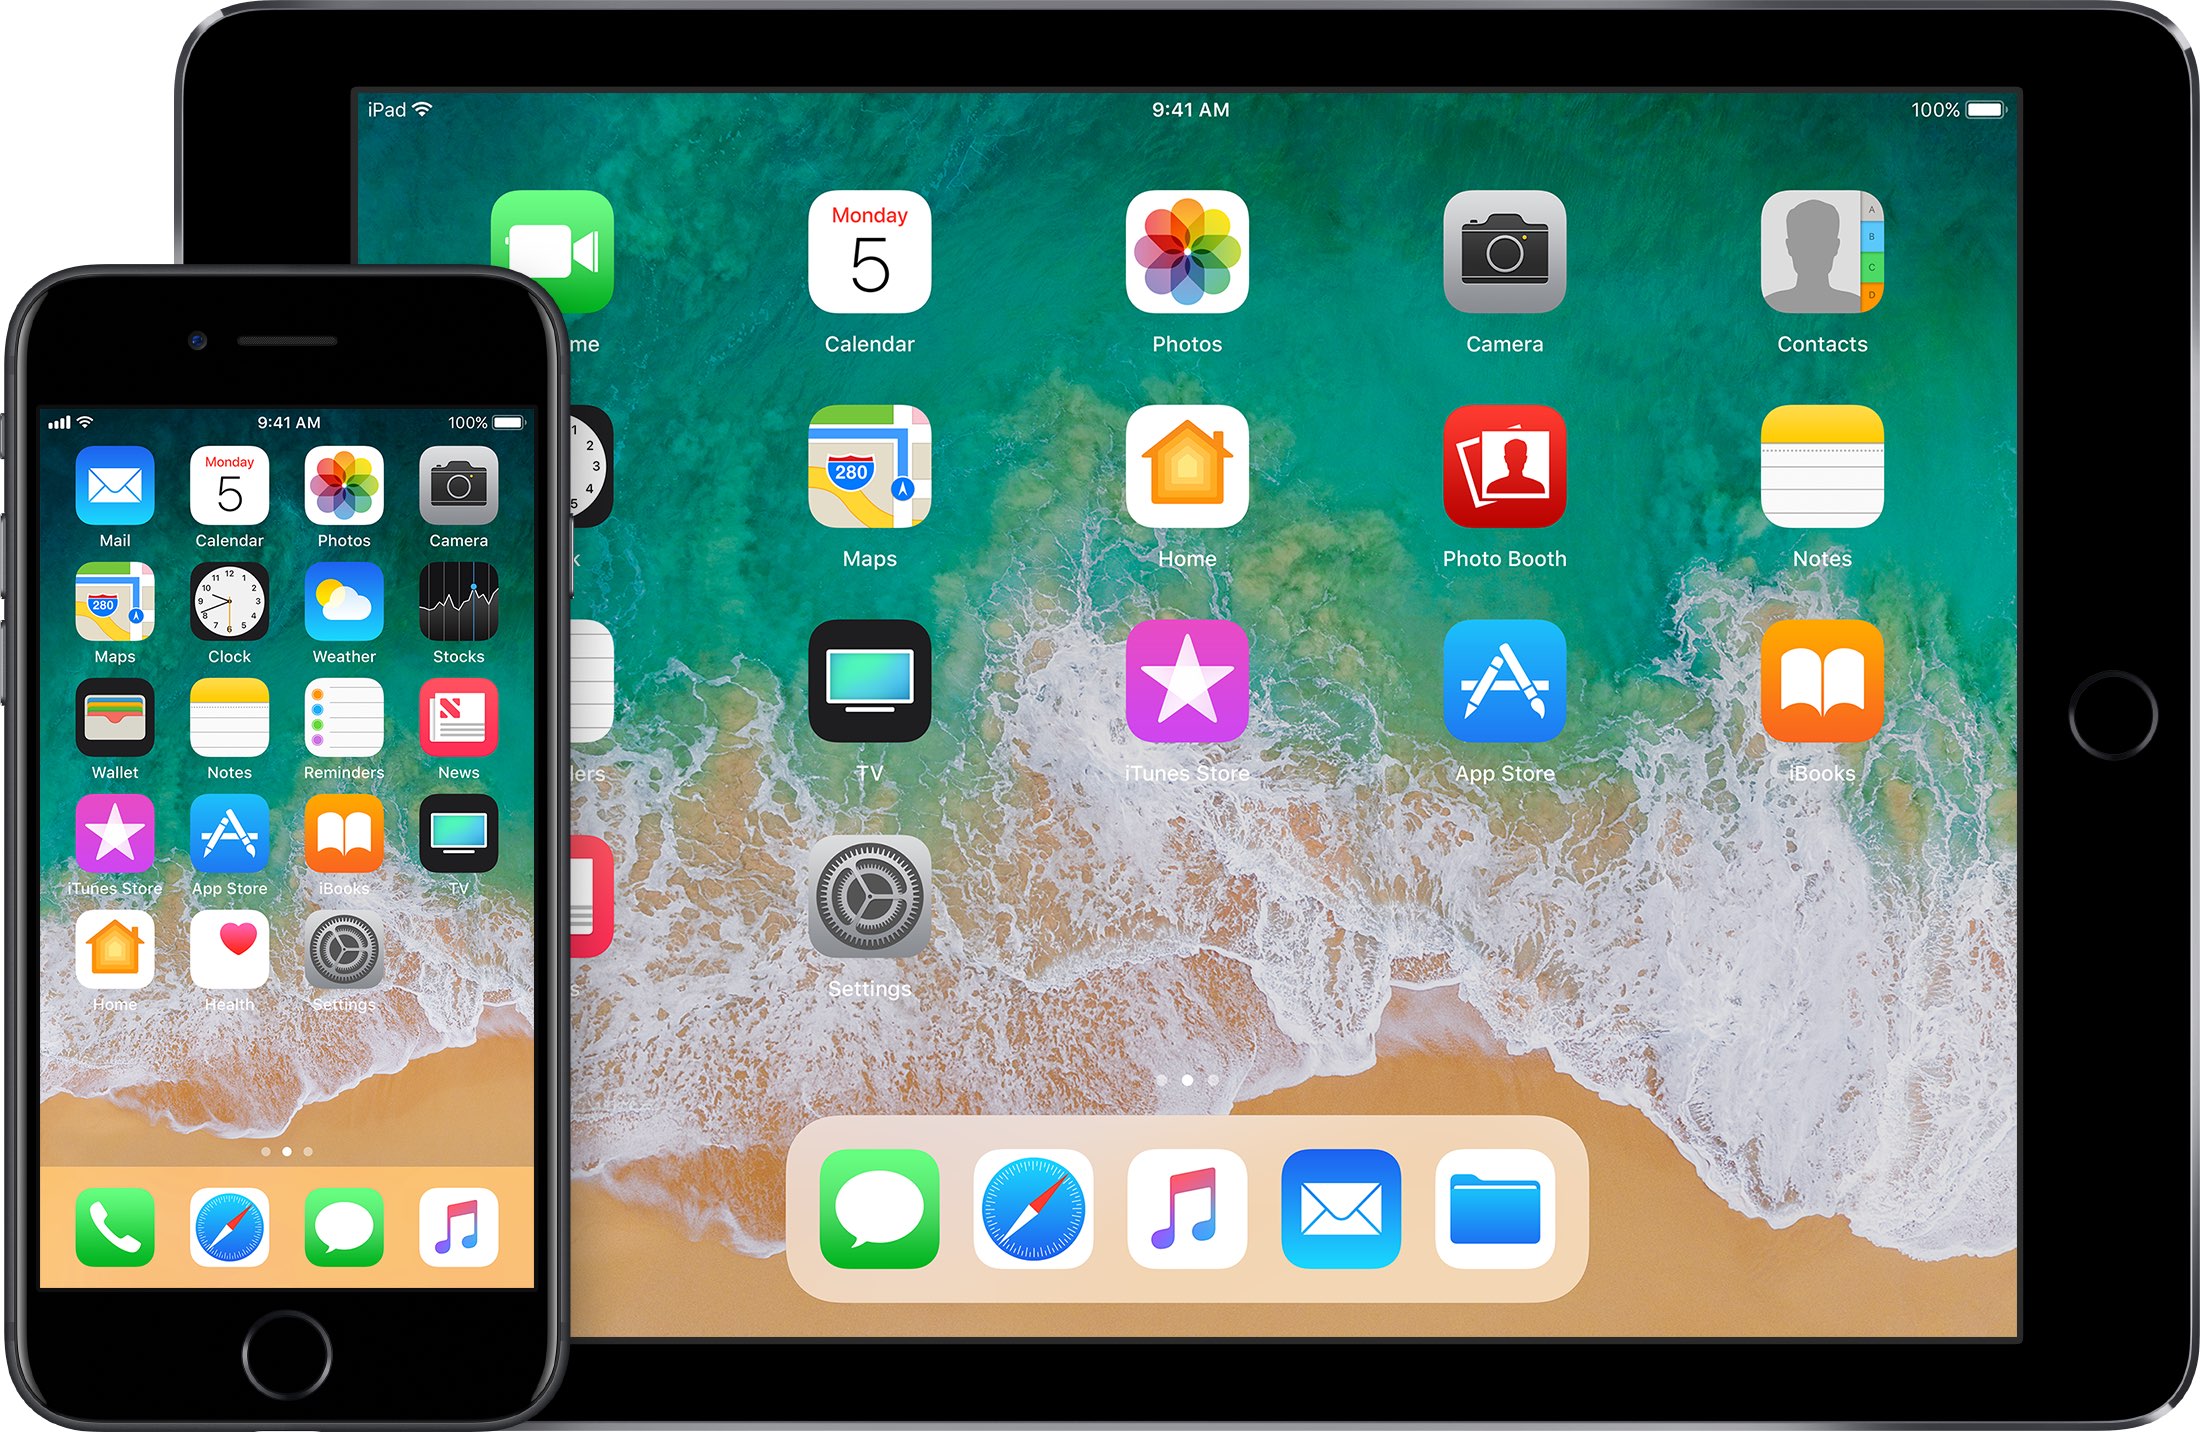 iOS 11 can automatically uninstall apps that haven't been used in a while